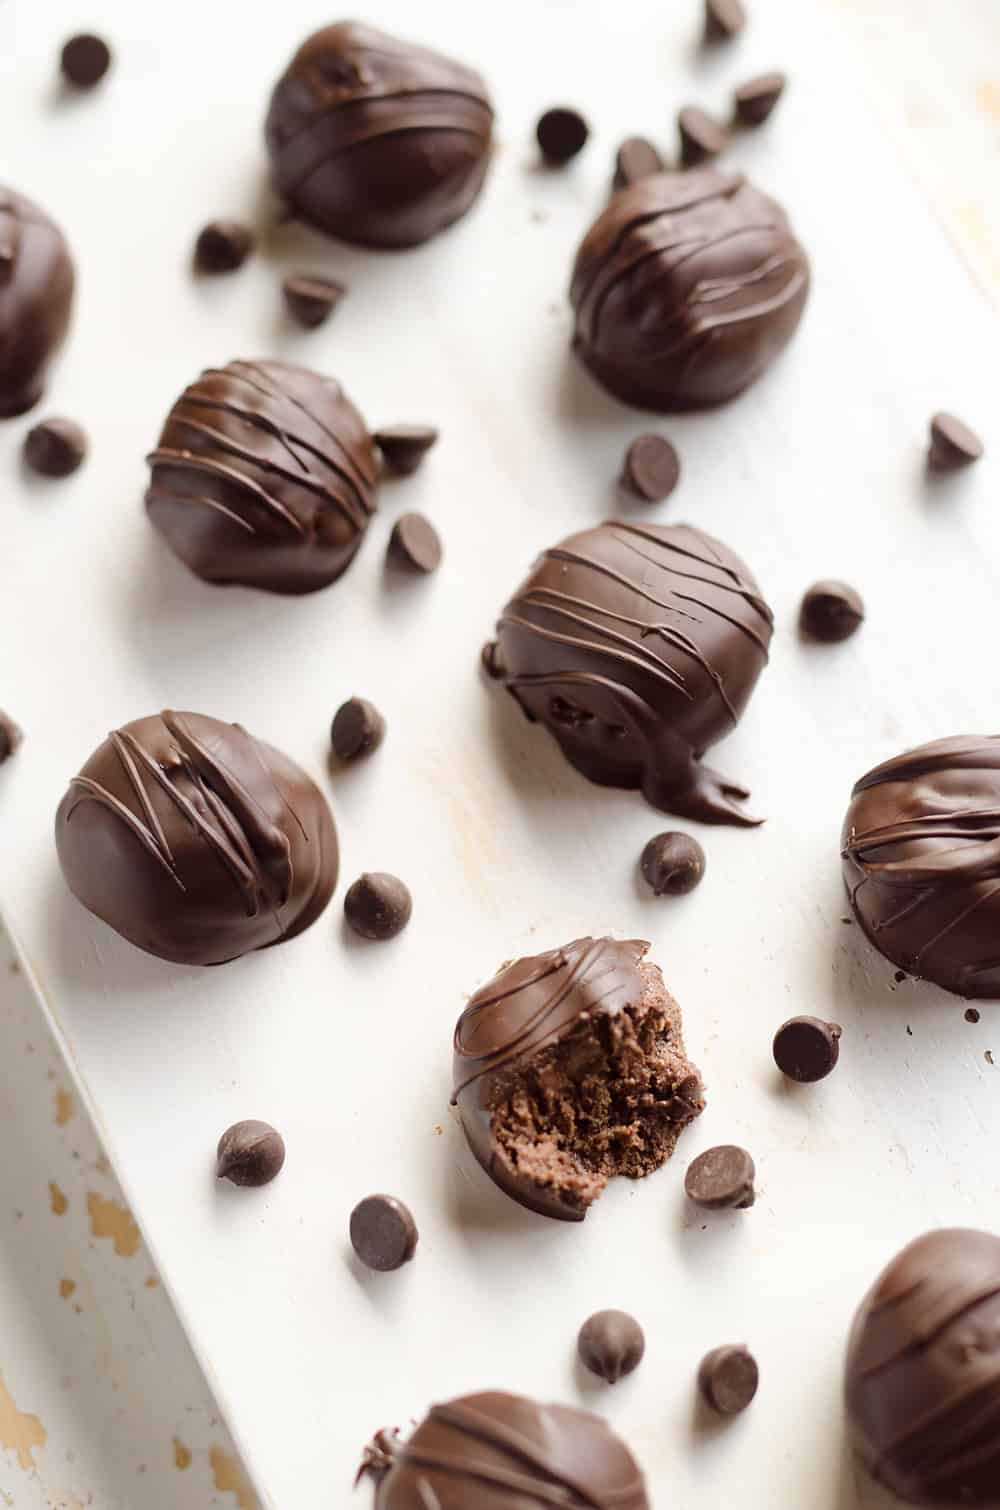 Protein Dark Chocolate Truffles are an easy and delicious treat made with protein powder and dark chocolate peanut butter for a healthy snack that tastes amazingly decadent!